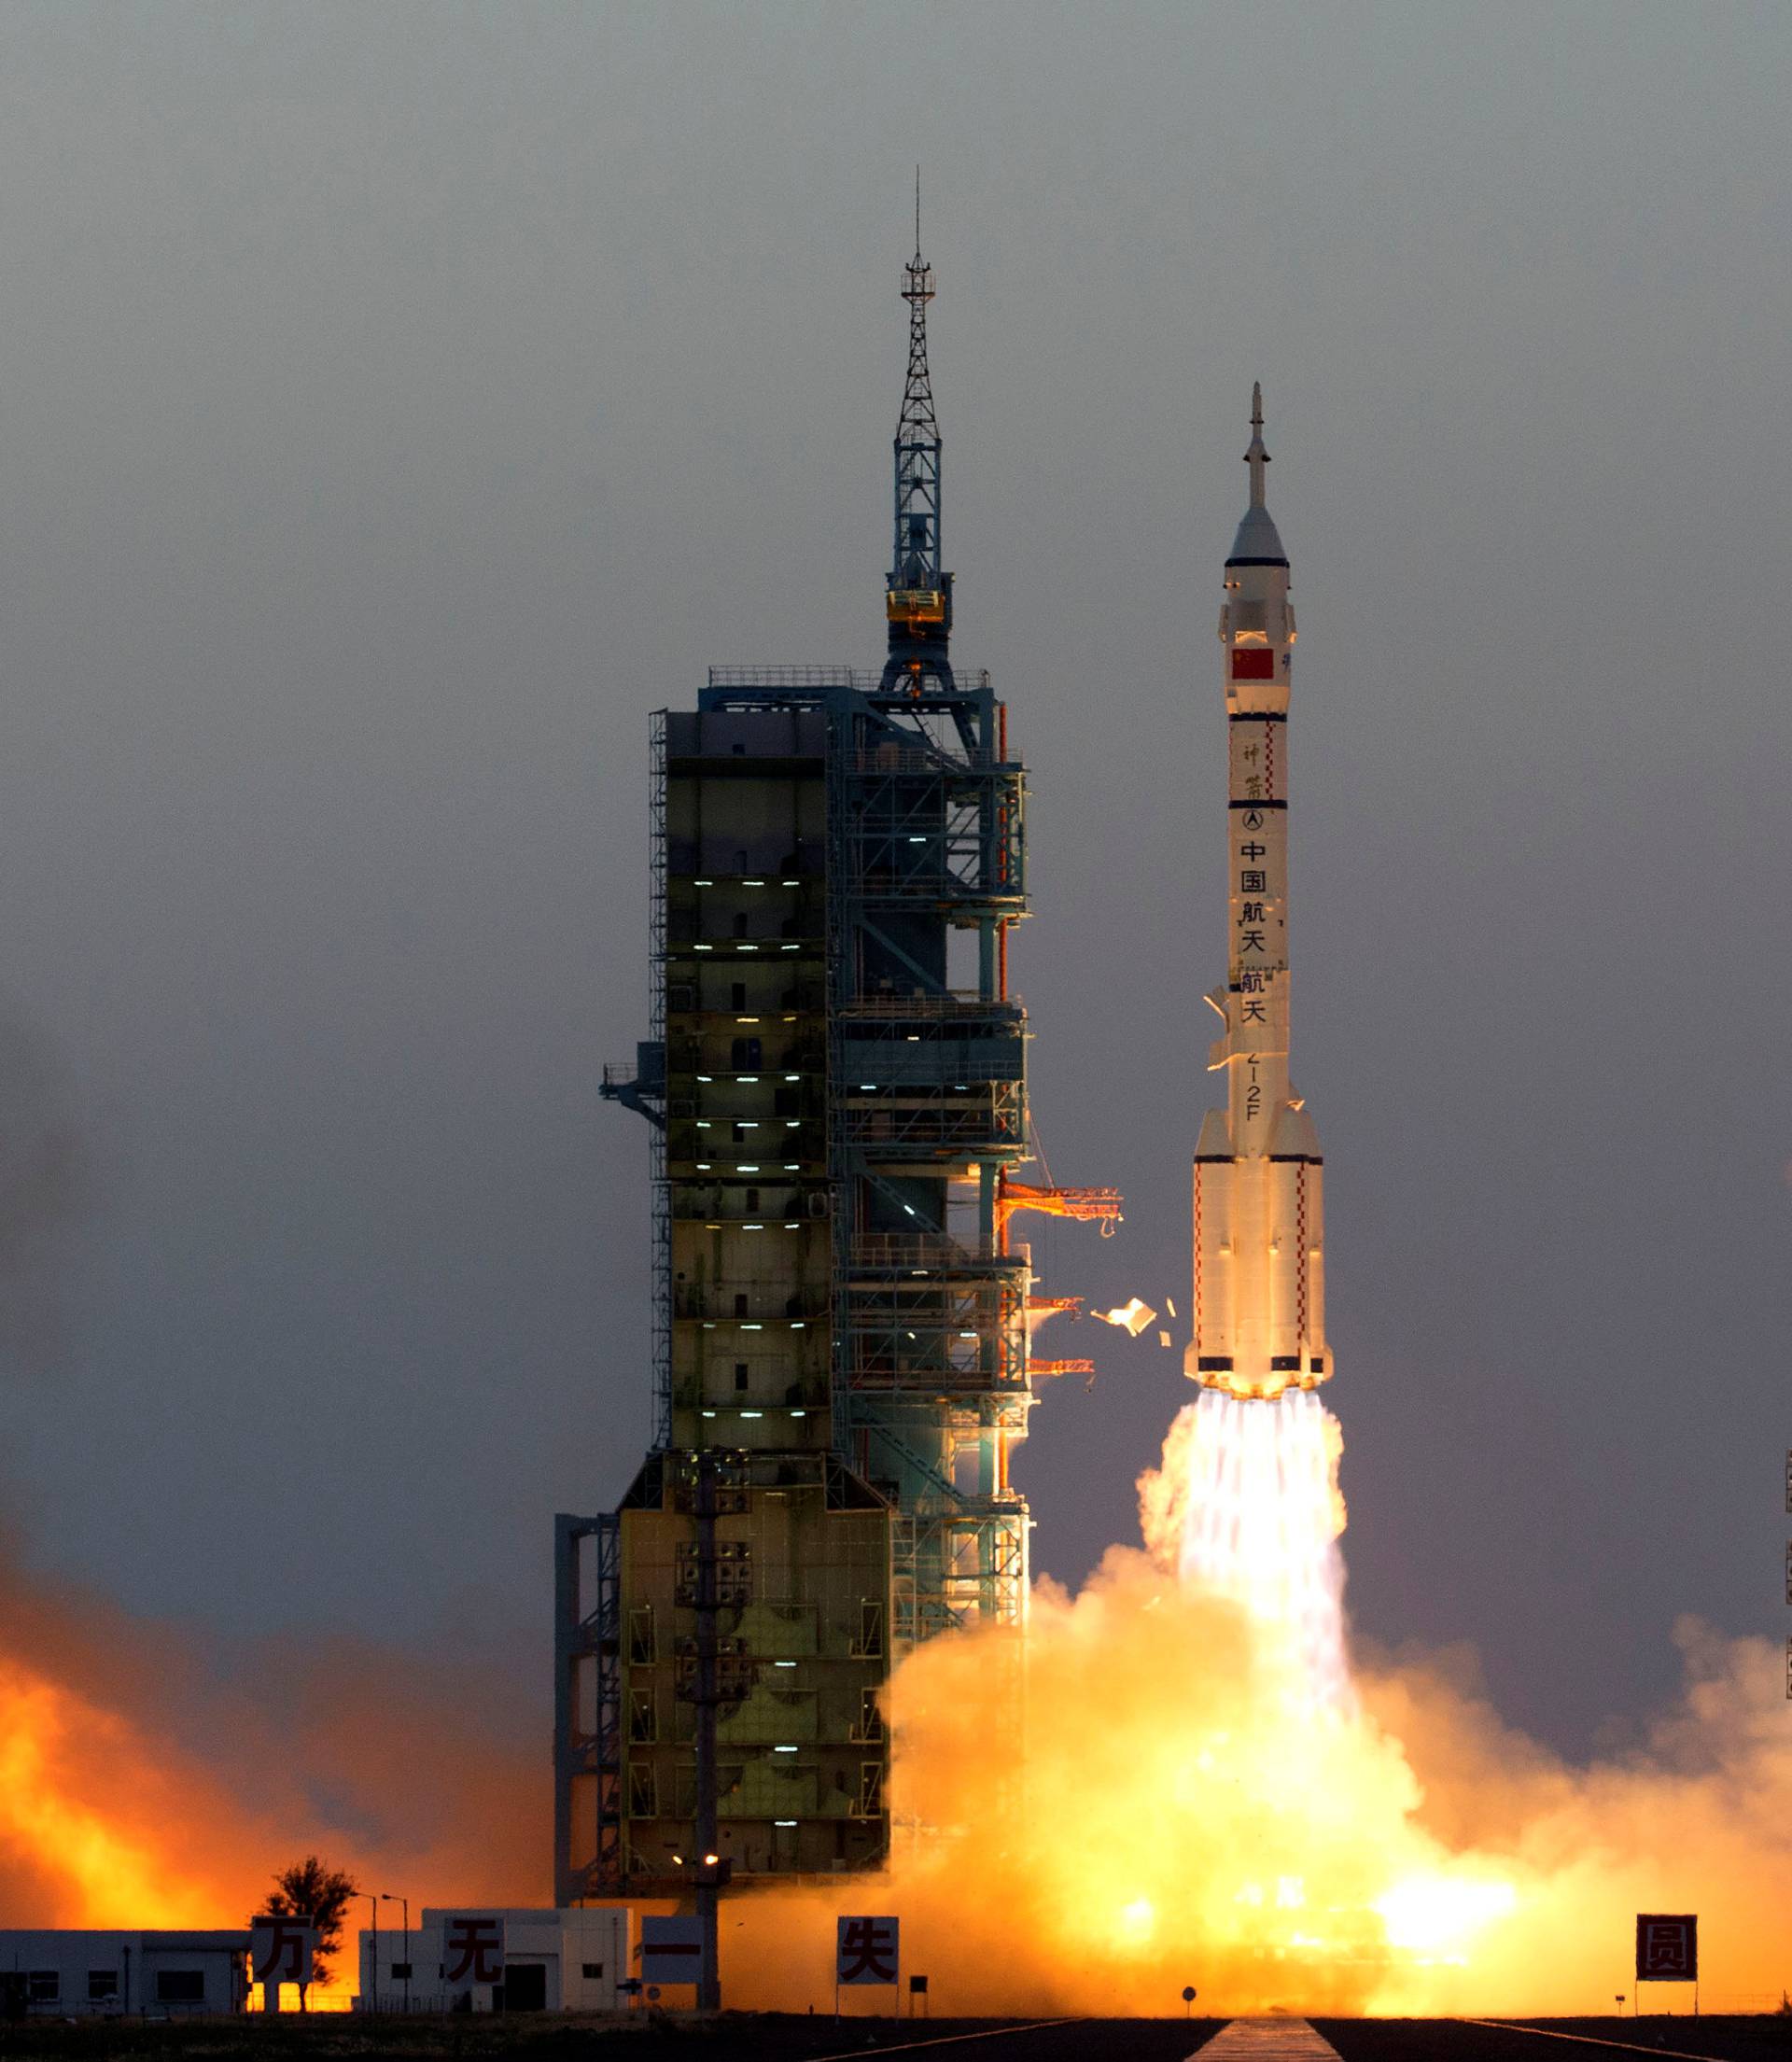 Shenzhou-11 manned spacecraft carrying astronauts Jing Haipeng and Chen Dong blasts off from the launchpad  in Jiuquan